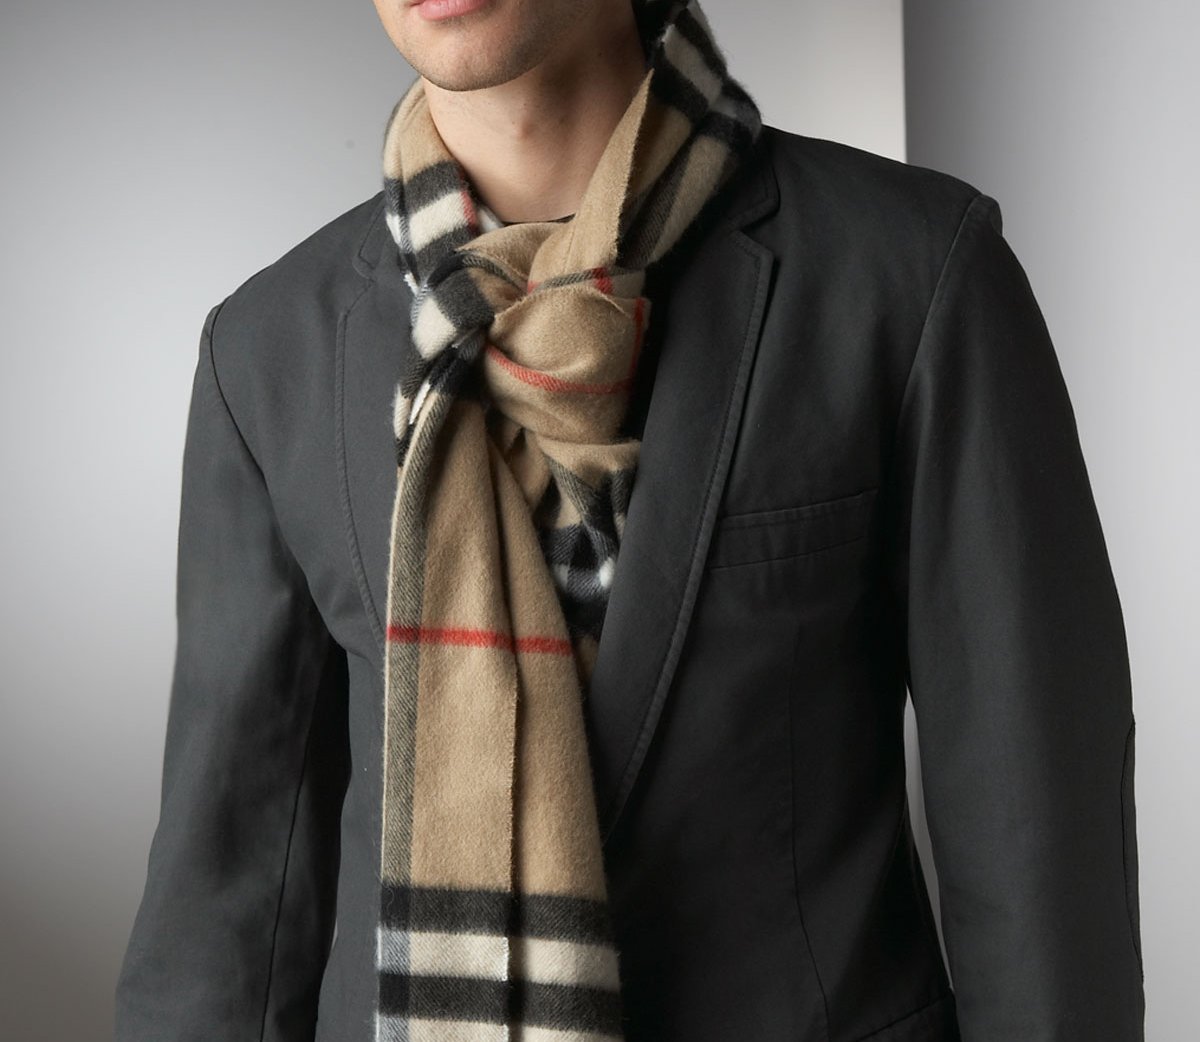 Fake-Knot - how to wear a scarf men